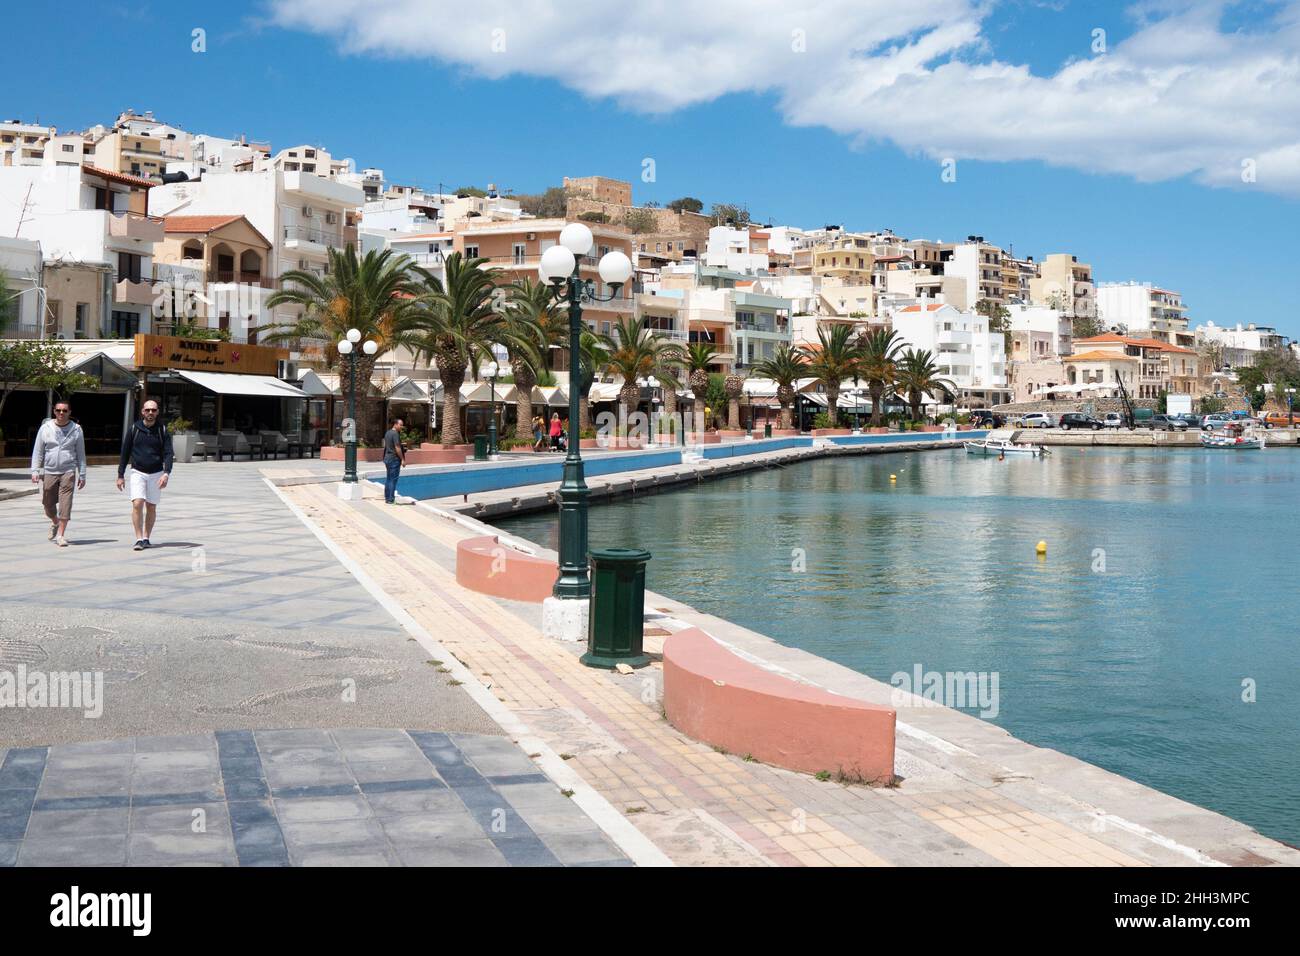 Sitia, Crete - Greece - May 4 2016  : View of the beautiful waterfront with cafes and bars lining the elegant promenade.Landscape aspect view. Stock Photo